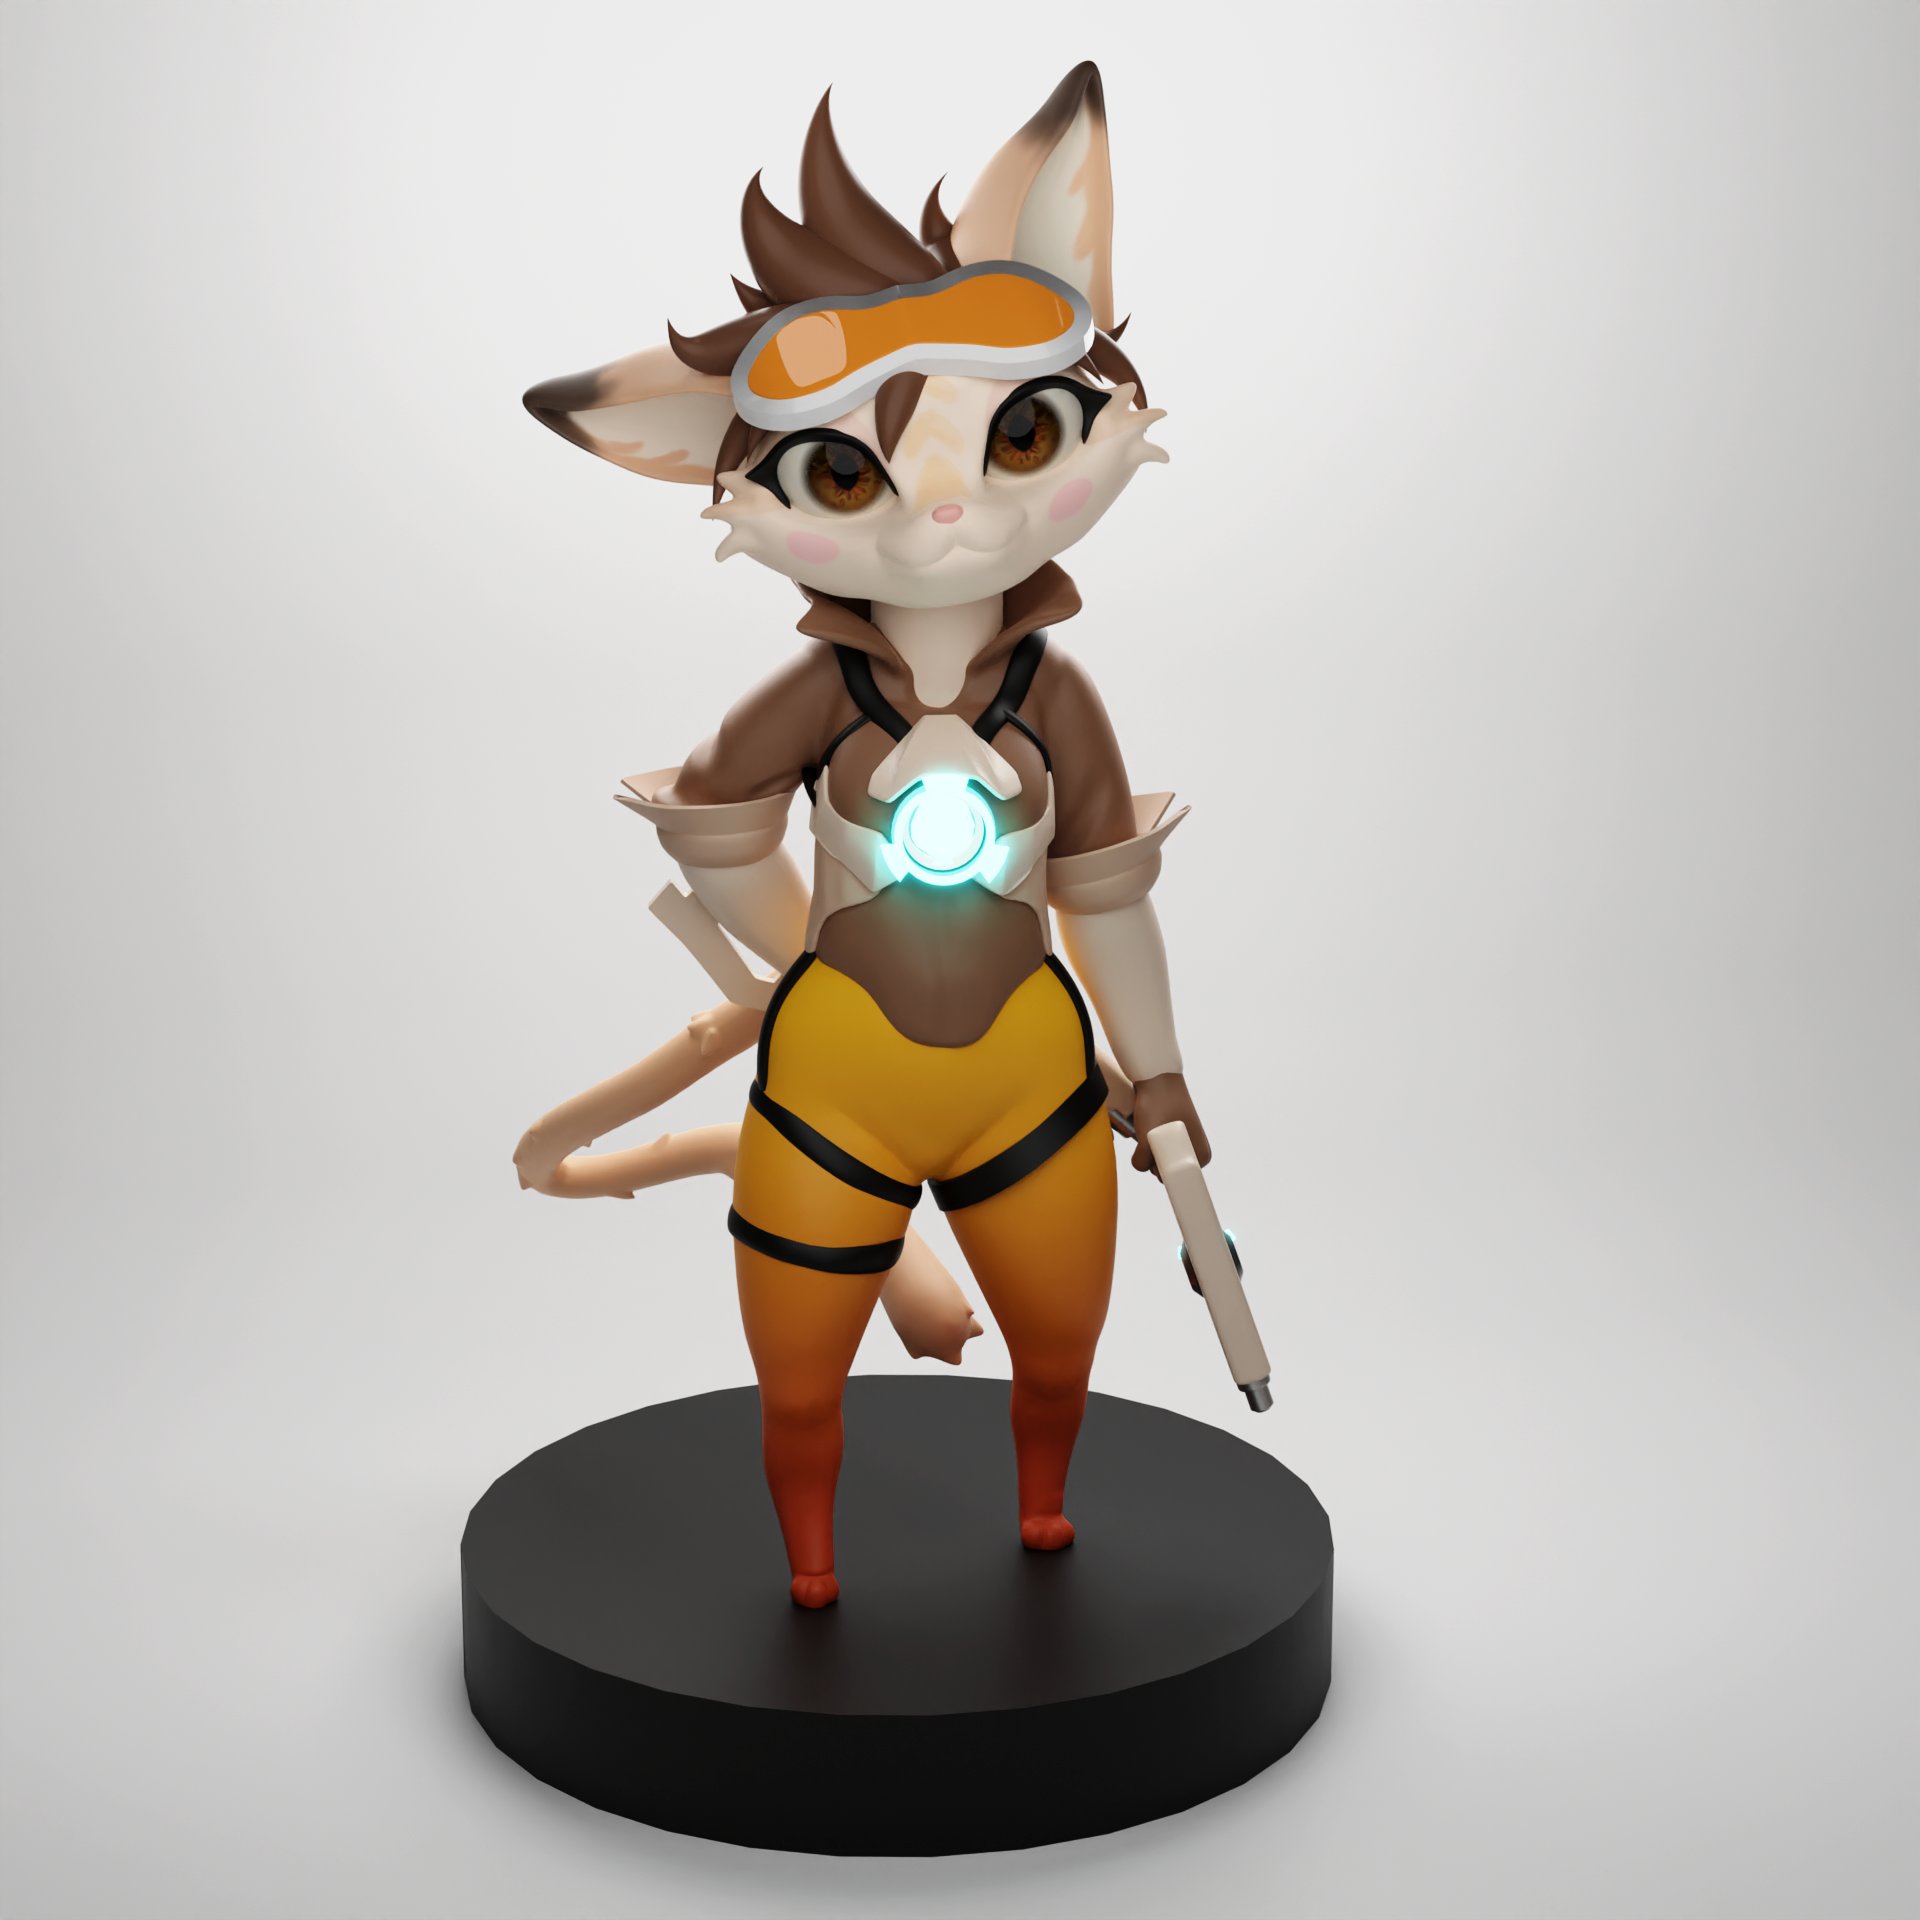 Perioperativ periode Kedelig Ydmyge R3DZ Open commissions on Twitter: "Commission finished! Hope you like this  Cat Tracer, made in Blender! Remember that I have open commissions !!! # tracer #furry #overwatch #blizzard #blendercommunity #blender #blender3d  #artstation #art #